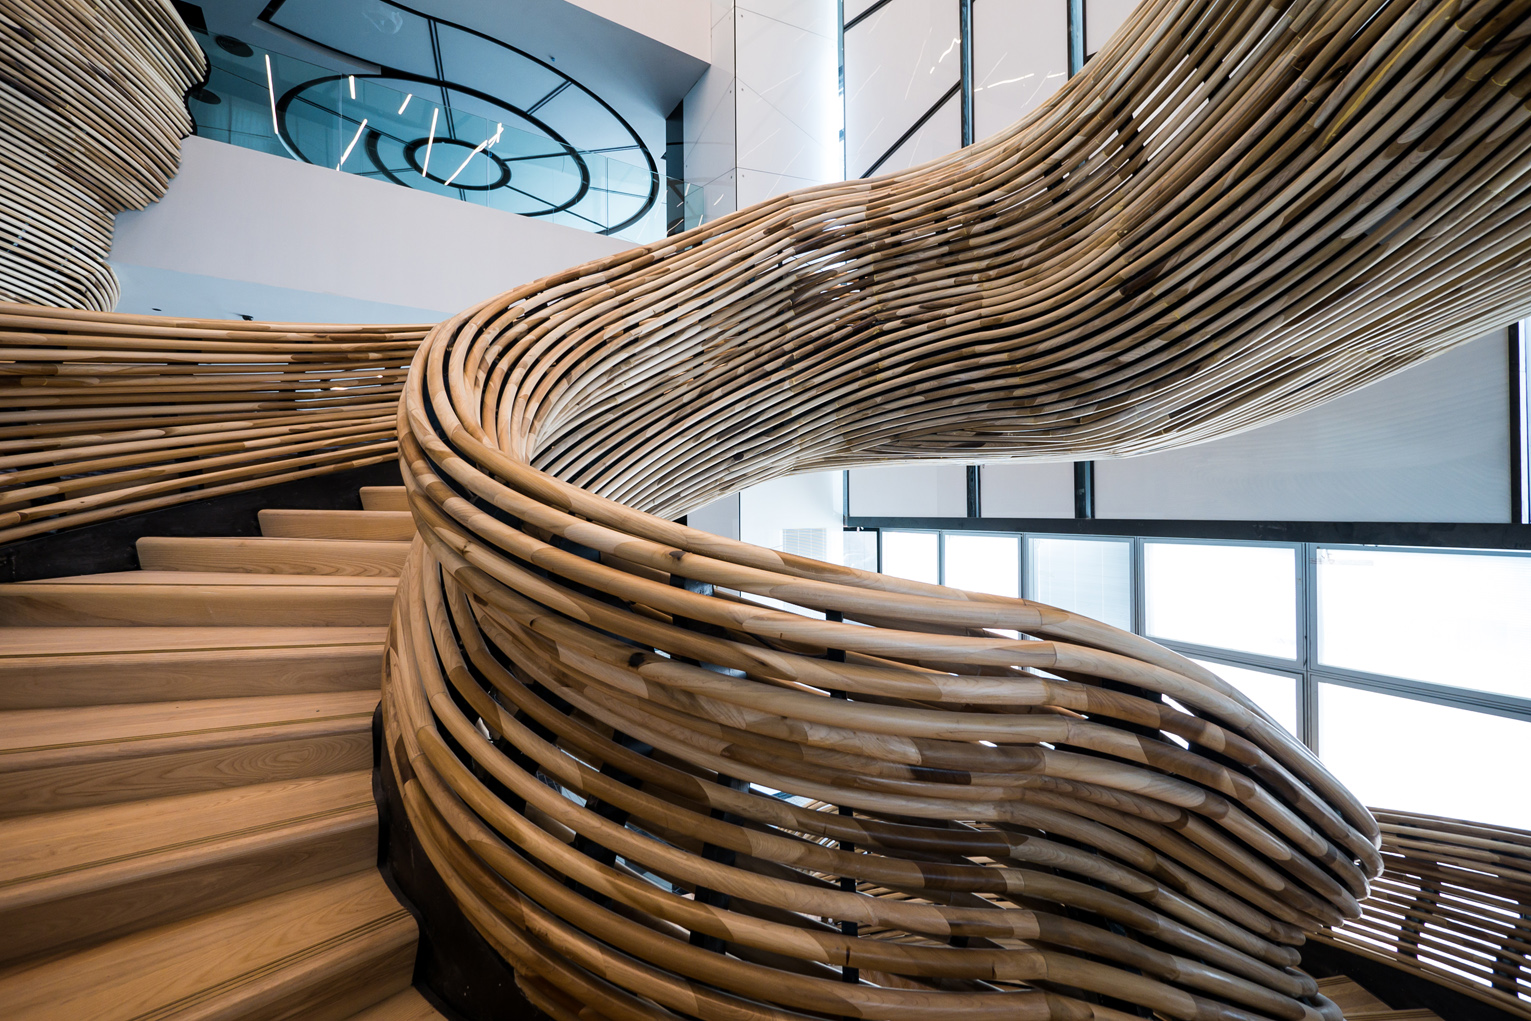 The raw Poplar wood used in the construction of the railings produced numerous natural colors; to unify the design, a palette of 12 average shades was selected from the Poplar pieces and then applied to the modules.